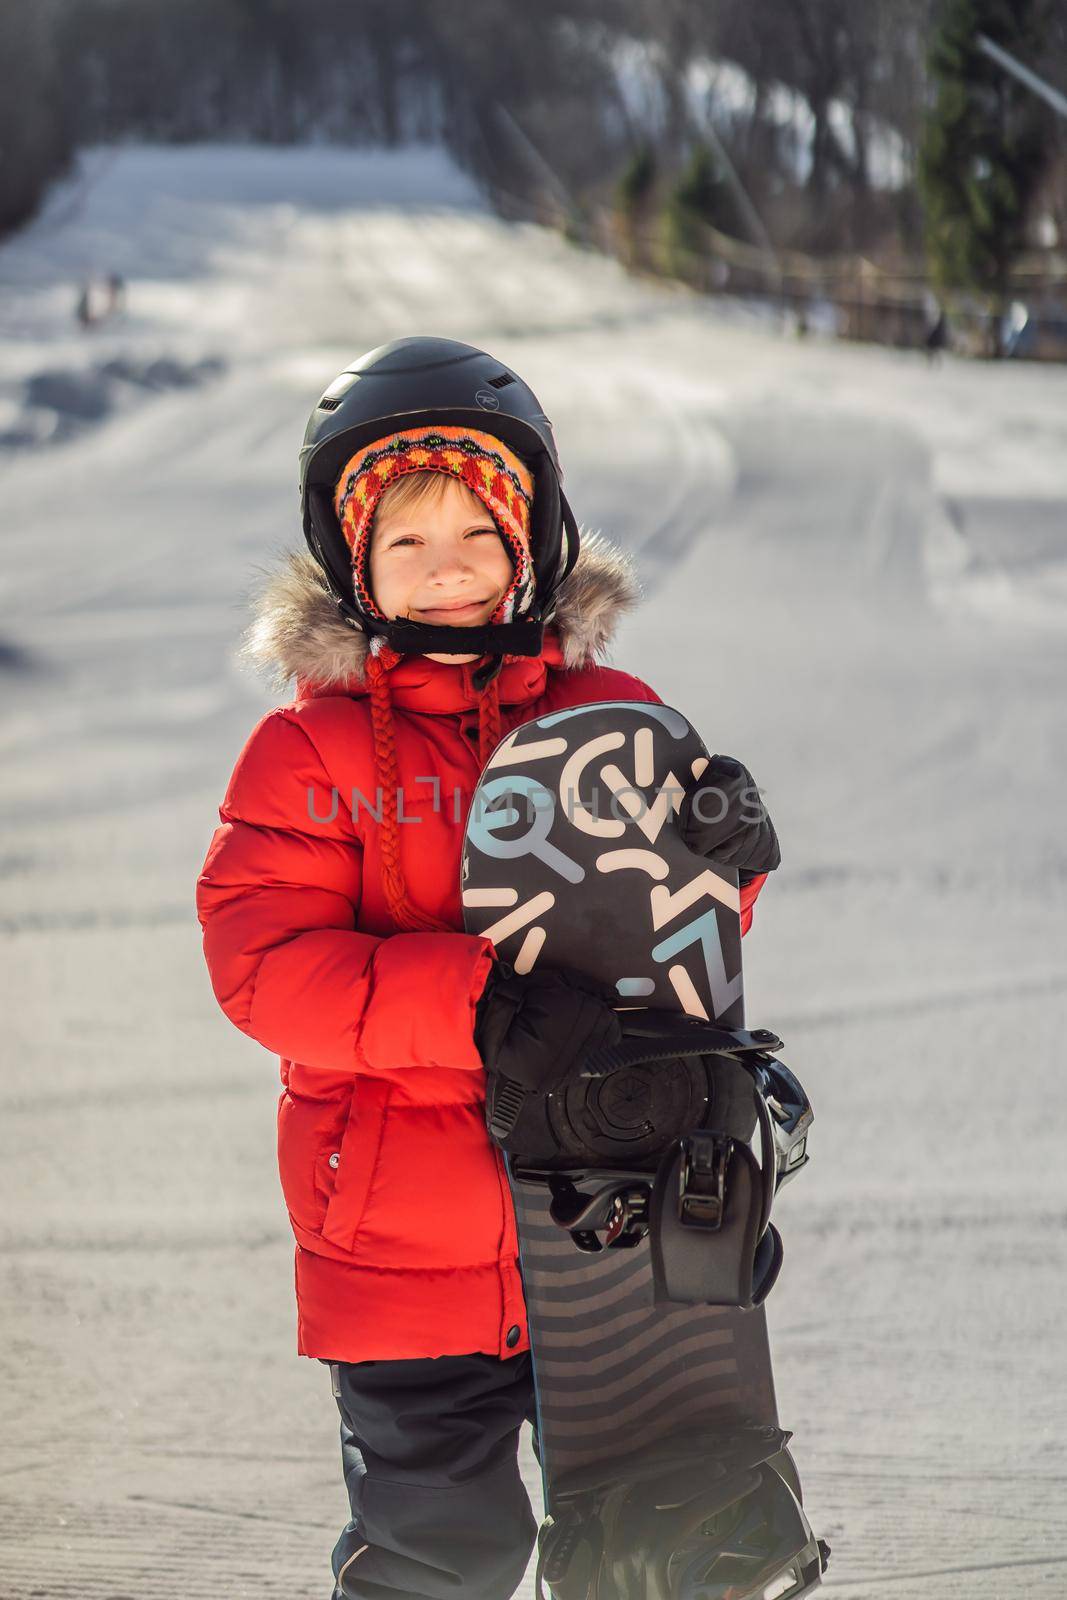 Little cute boy is ready for snowboarding. Activities for children in winter. Children's winter sport. Lifestyle.